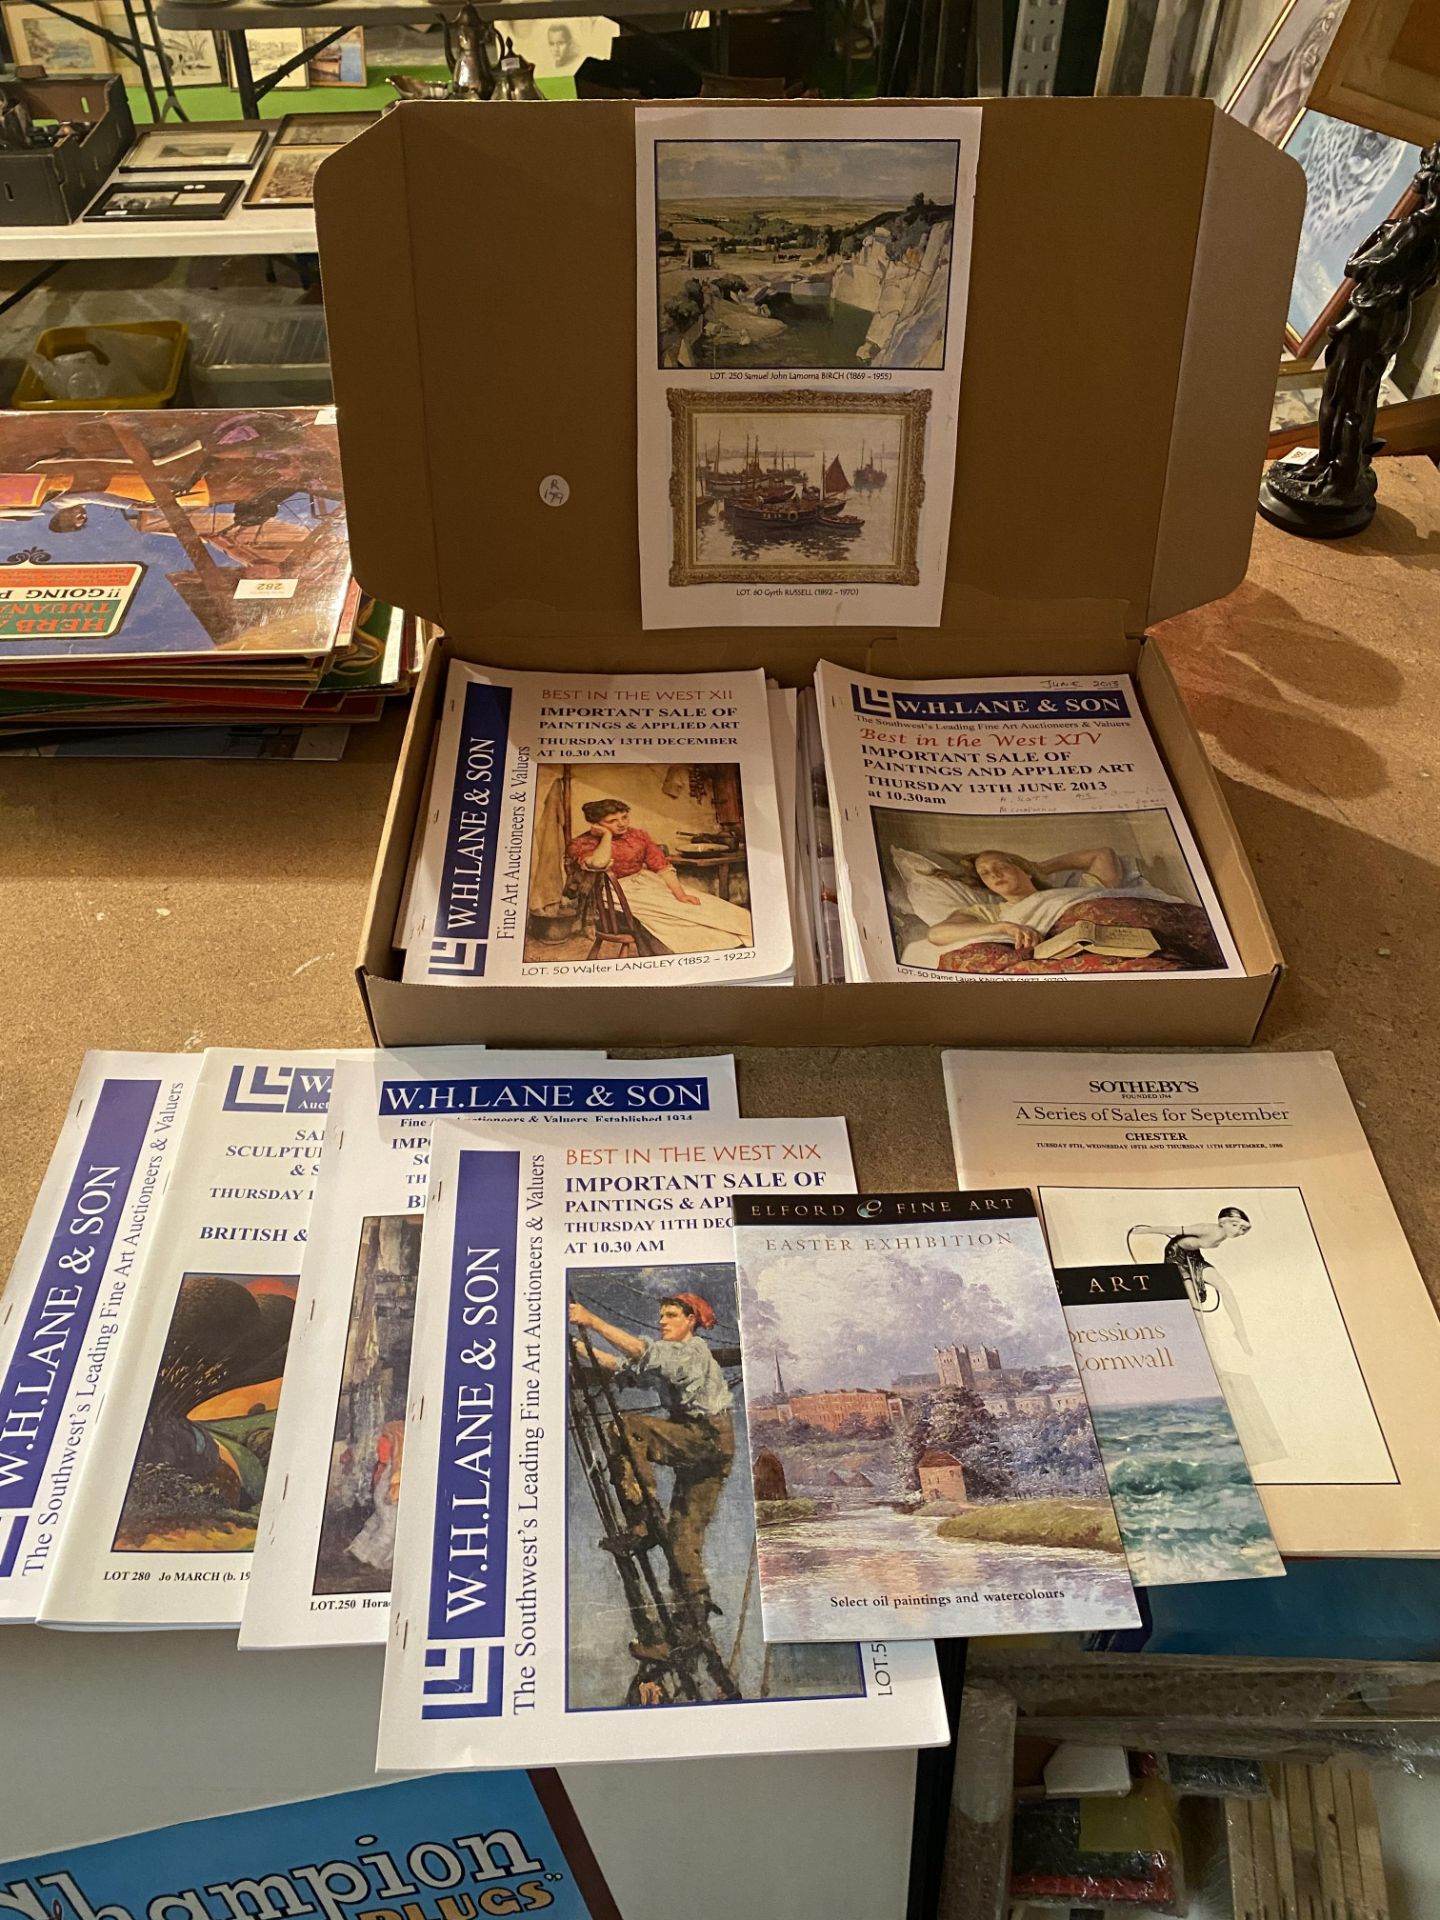 A LARGE COLLECTION OF CORNISH AUCTION CATALOGUES TO INCLUDE W.H.LANE & SONS AND A SOTHERBY'S OF